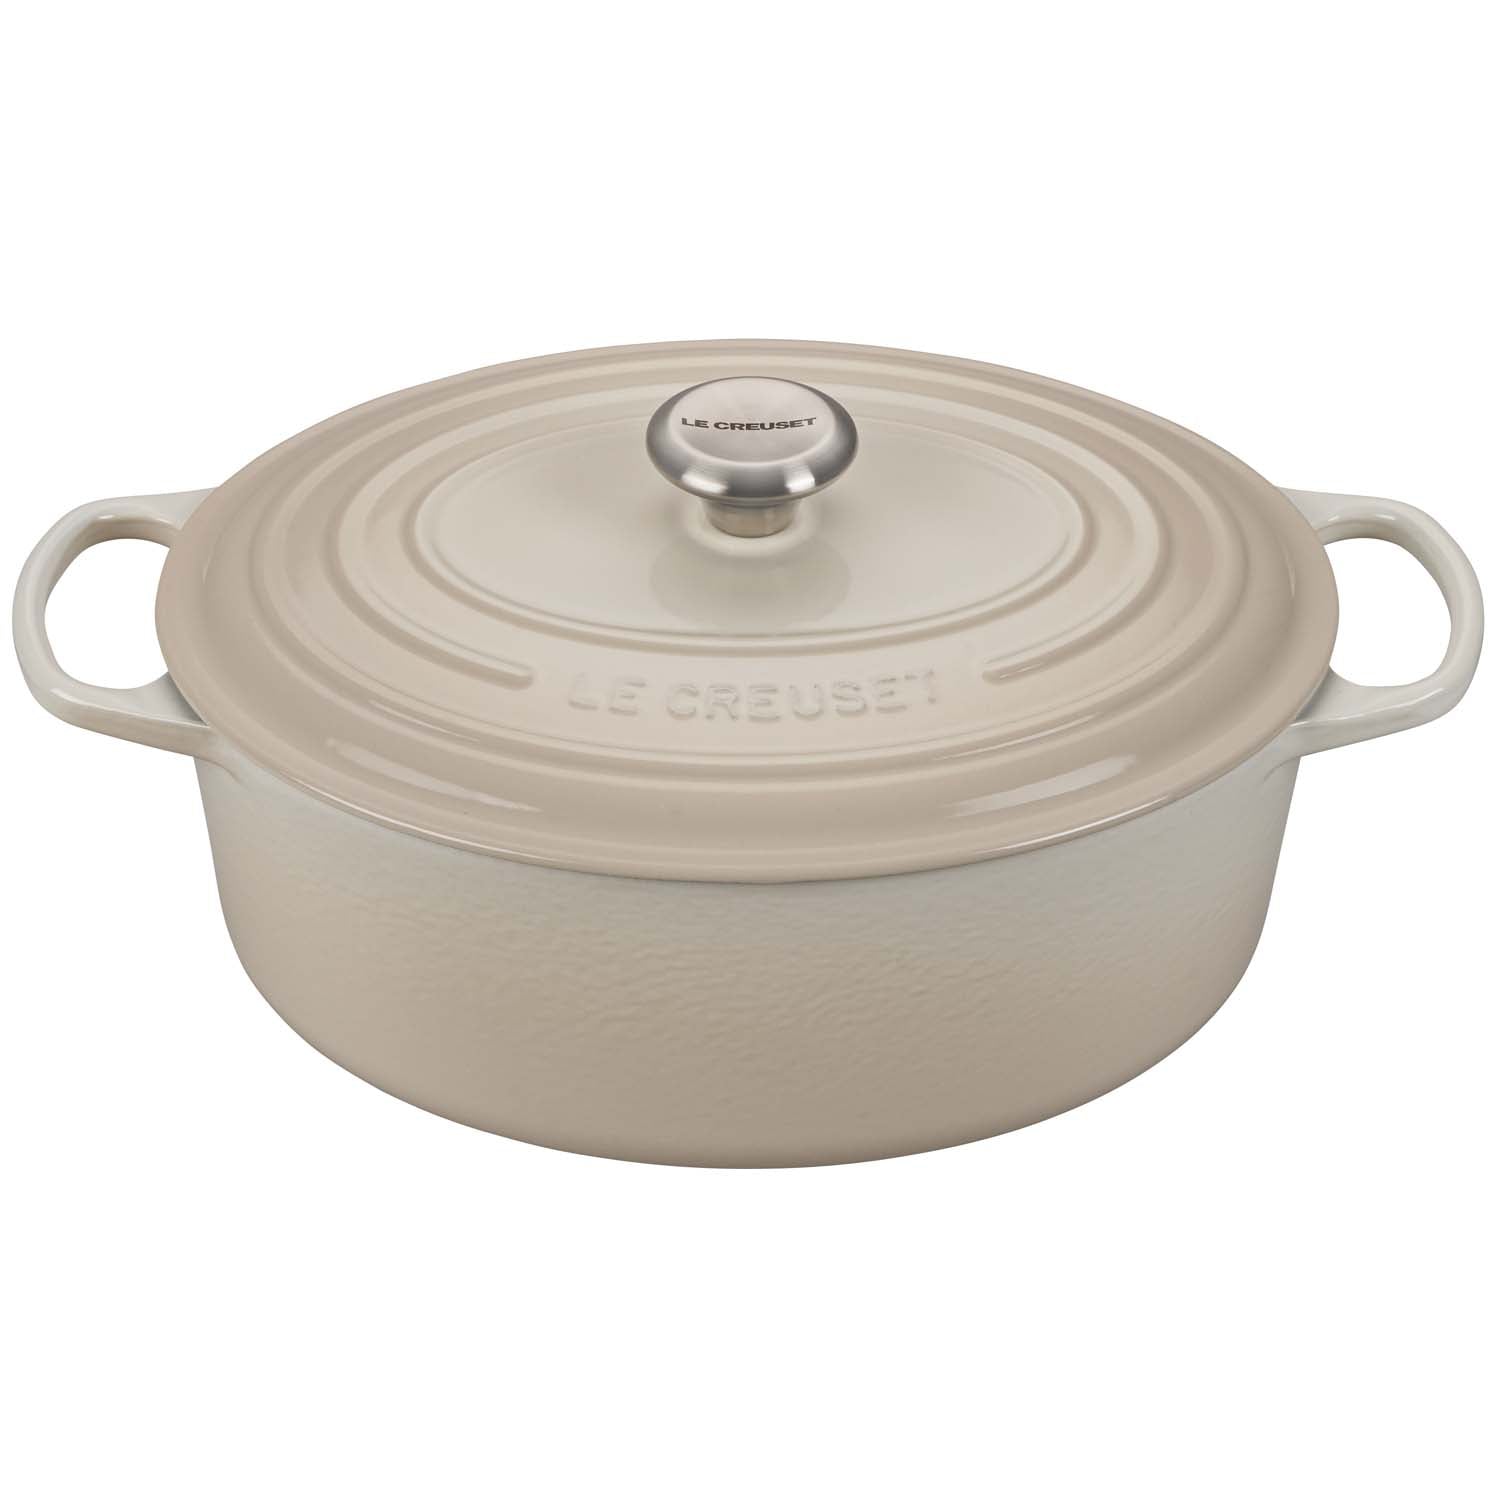 Commercial CHEF 5 qt. Cast Iron Dutch Oven with Dome Lid & Handles